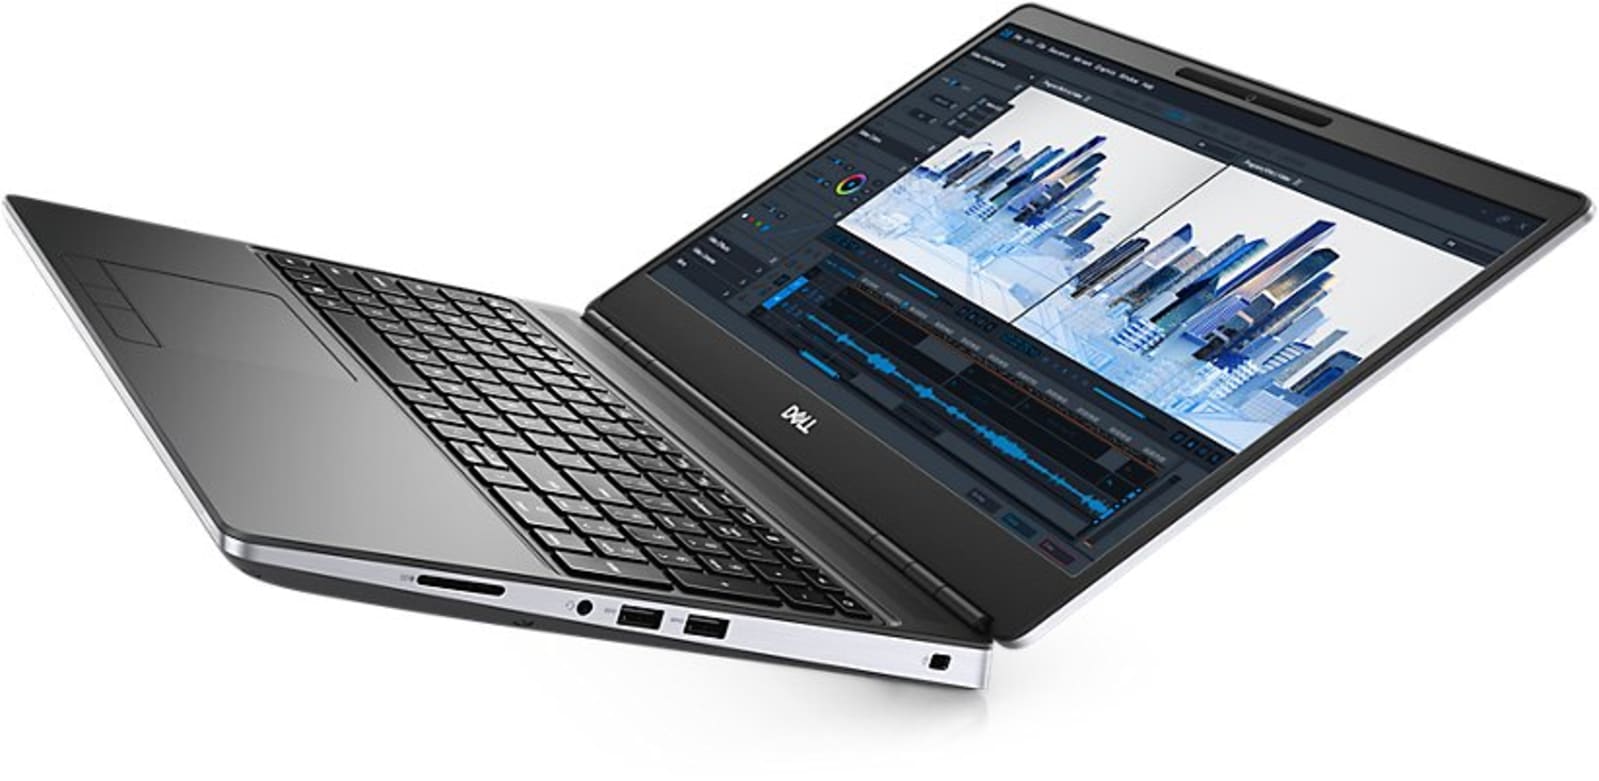 Restored Dell Precision 7000 7560 Workstation Laptop (2021) | 15.6" FHD Touch | Core i5 - 256GB SSD + 256GB SSD - 8GB RAM | 6 Cores @ 4.6 GHz - 11th Gen CPU (Refurbished) - image 4 of 11